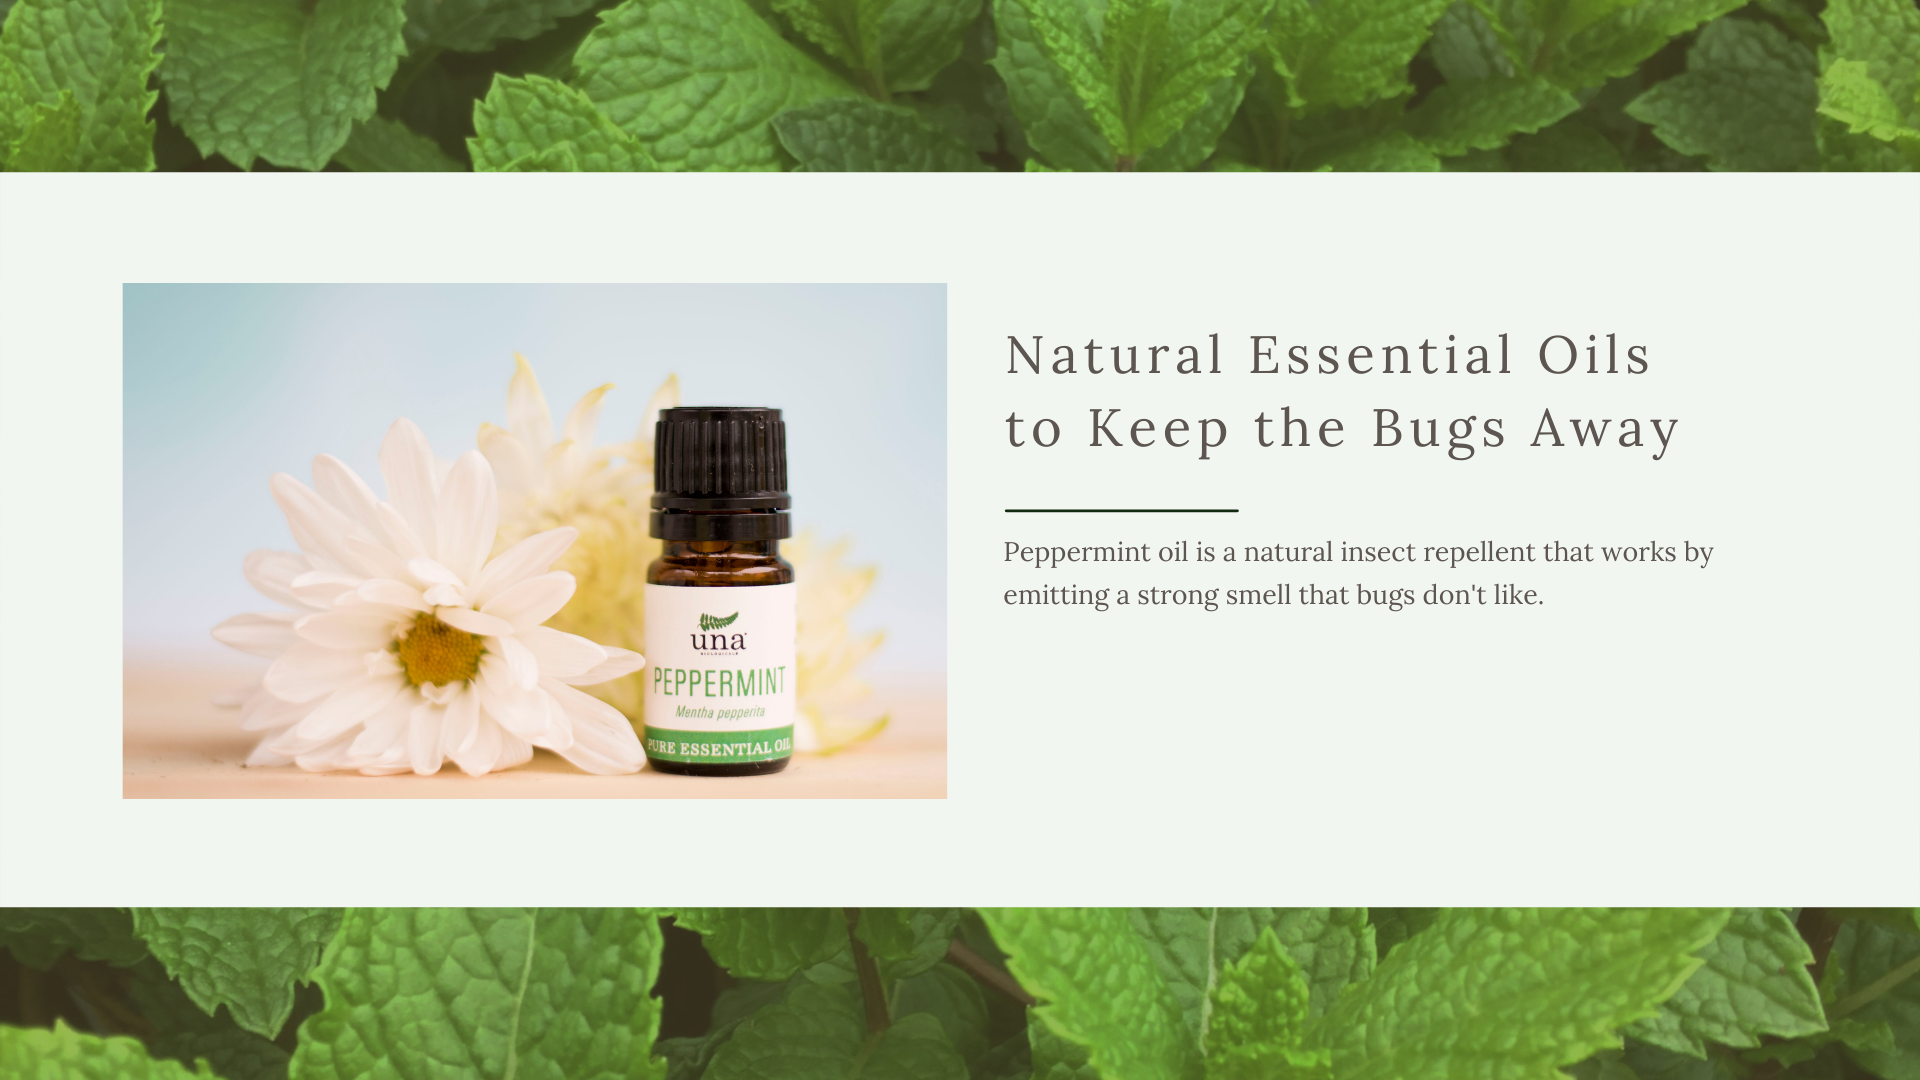 Natural Essential Oils to Keep the Bugs Away